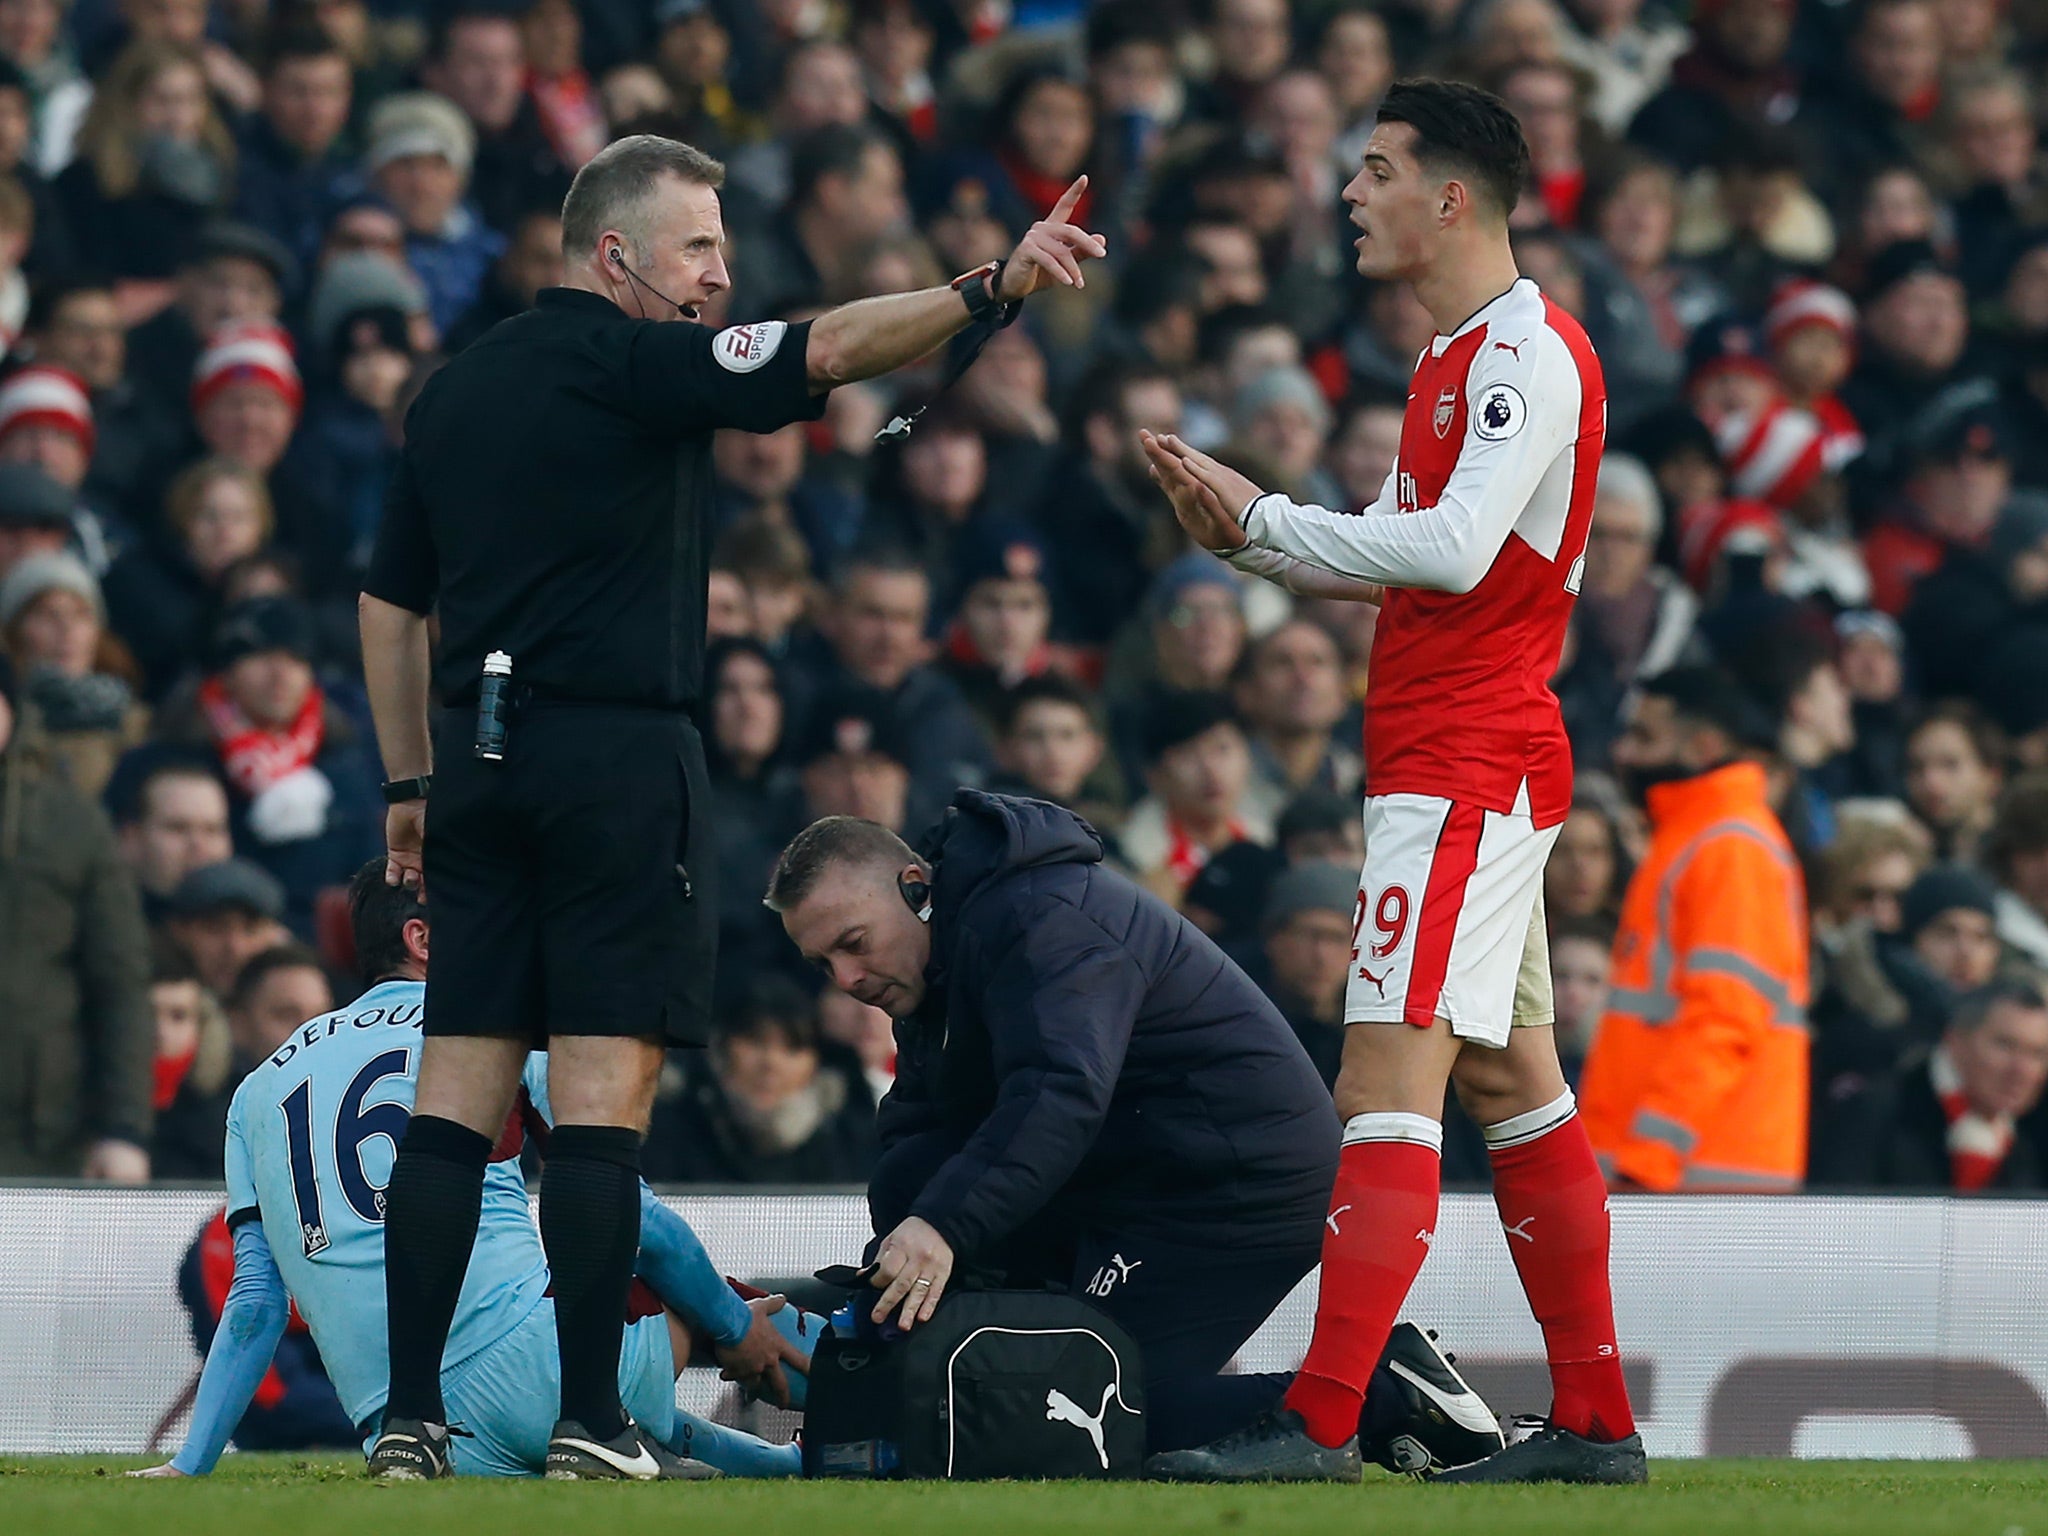 Jonathan Moss sent Granit Xhaka off for the second time this season after his tackle on Steven Defour